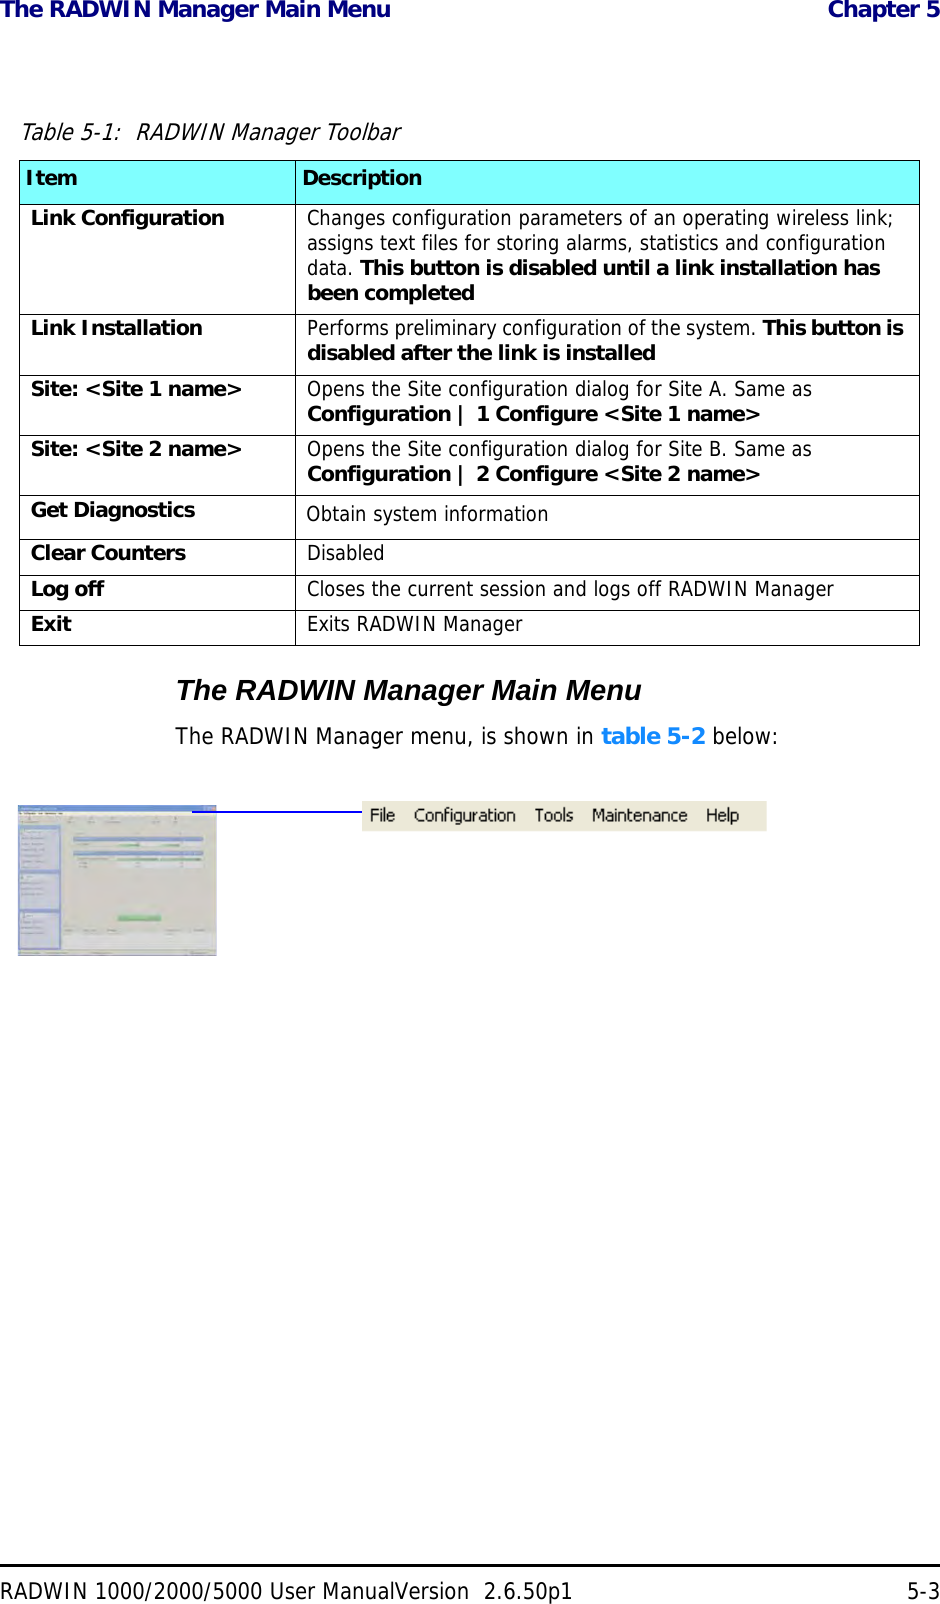 The RADWIN Manager Main Menu  Chapter 5RADWIN 1000/2000/5000 User ManualVersion  2.6.50p1 5-3The RADWIN Manager Main MenuThe RADWIN Manager menu, is shown in table 5-2 below:Table 5-1:  RADWIN Manager ToolbarItem DescriptionLink Configuration Changes configuration parameters of an operating wireless link; assigns text files for storing alarms, statistics and configuration data. This button is disabled until a link installation has been completedLink Installation Performs preliminary configuration of the system. This button is disabled after the link is installedSite: &lt;Site 1 name&gt; Opens the Site configuration dialog for Site A. Same as Configuration | 1 Configure &lt;Site 1 name&gt;Site: &lt;Site 2 name&gt; Opens the Site configuration dialog for Site B. Same as Configuration | 2 Configure &lt;Site 2 name&gt;Get Diagnostics Obtain system informationClear Counters DisabledLog off Closes the current session and logs off RADWIN ManagerExit Exits RADWIN Manager